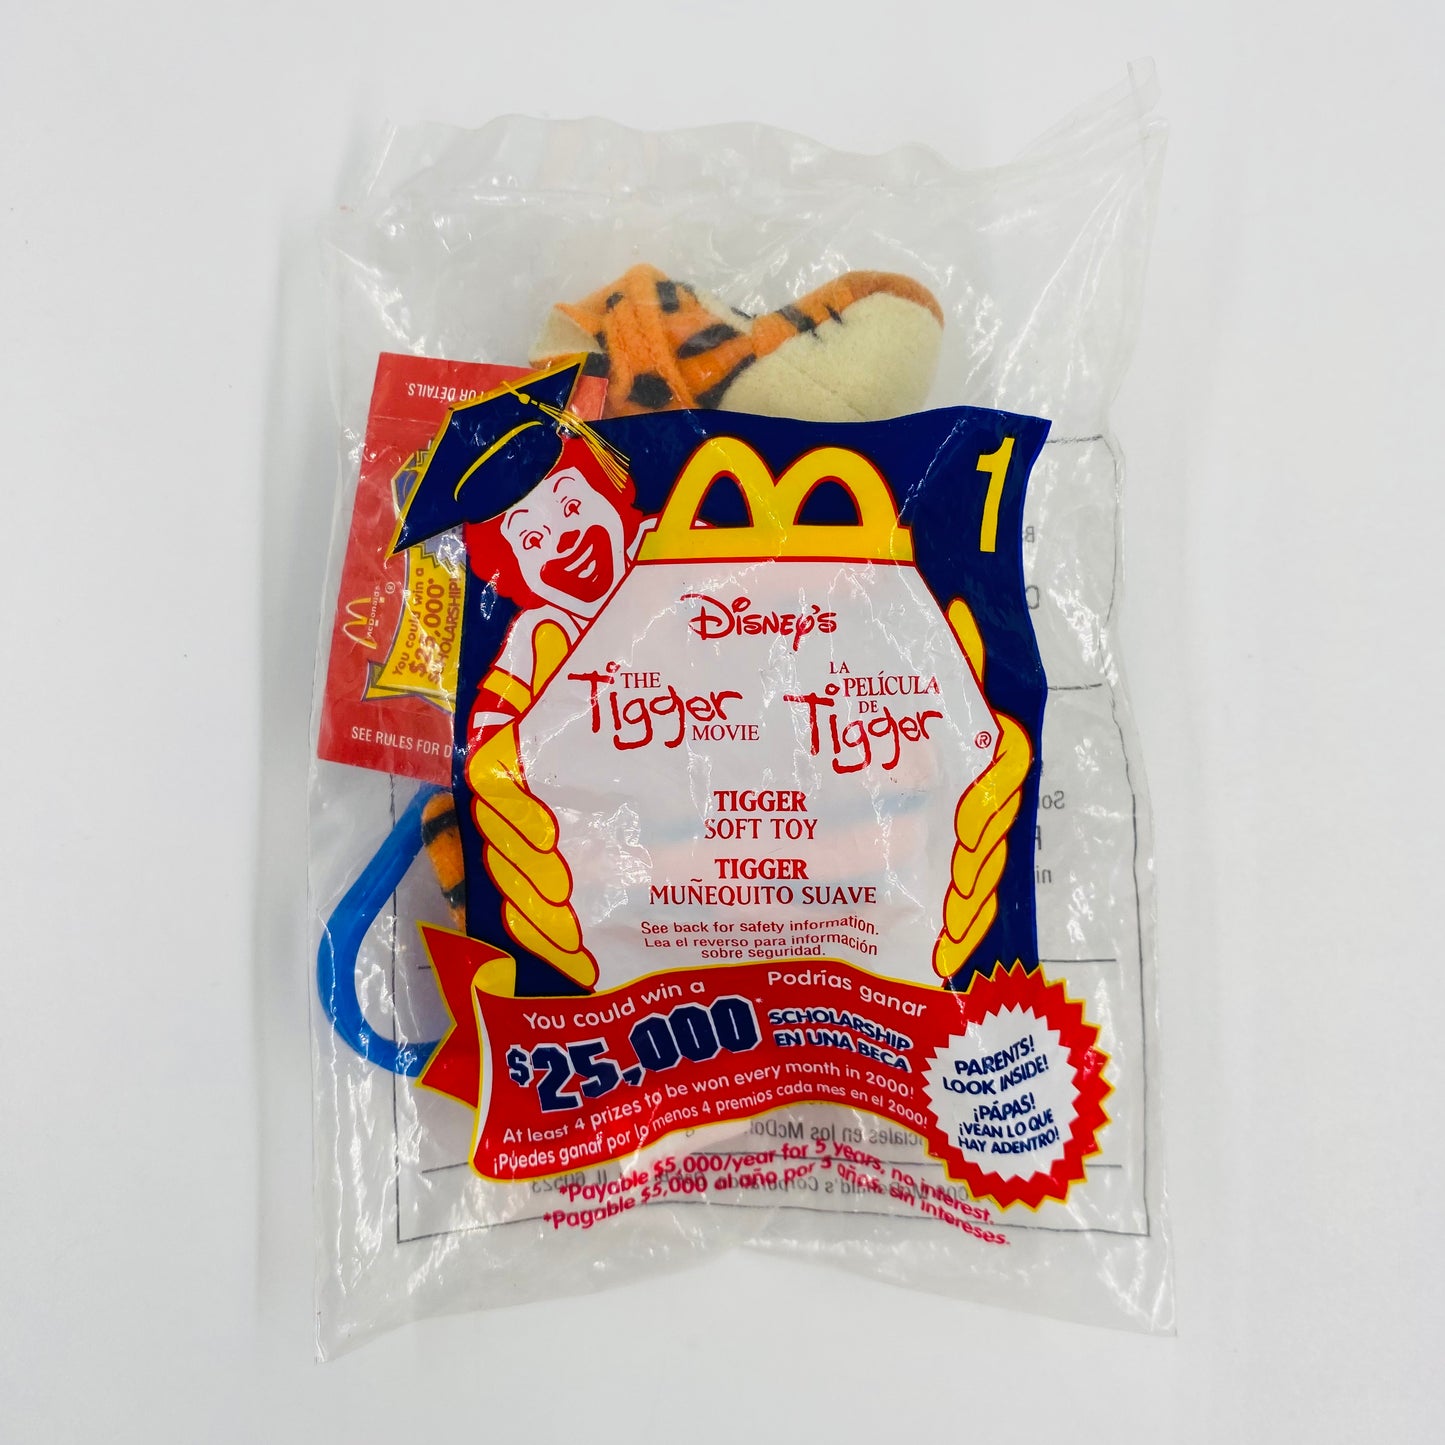 The Tigger Movie Tigger McDonald's Happy Meal soft toy (2000) bagged